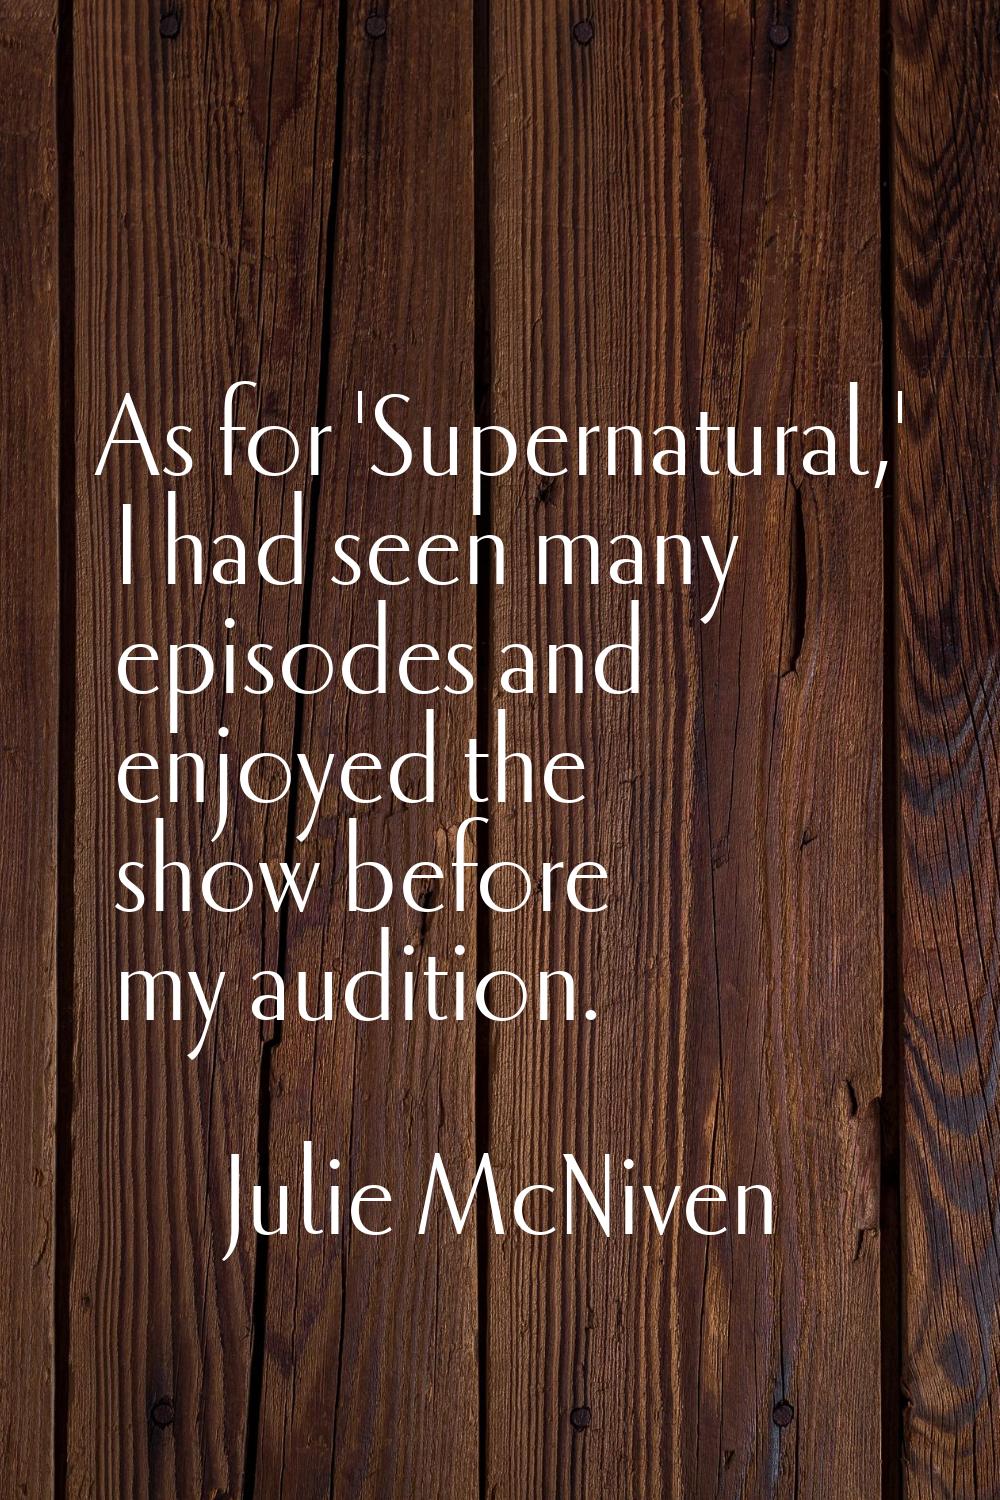 As for 'Supernatural,' I had seen many episodes and enjoyed the show before my audition.